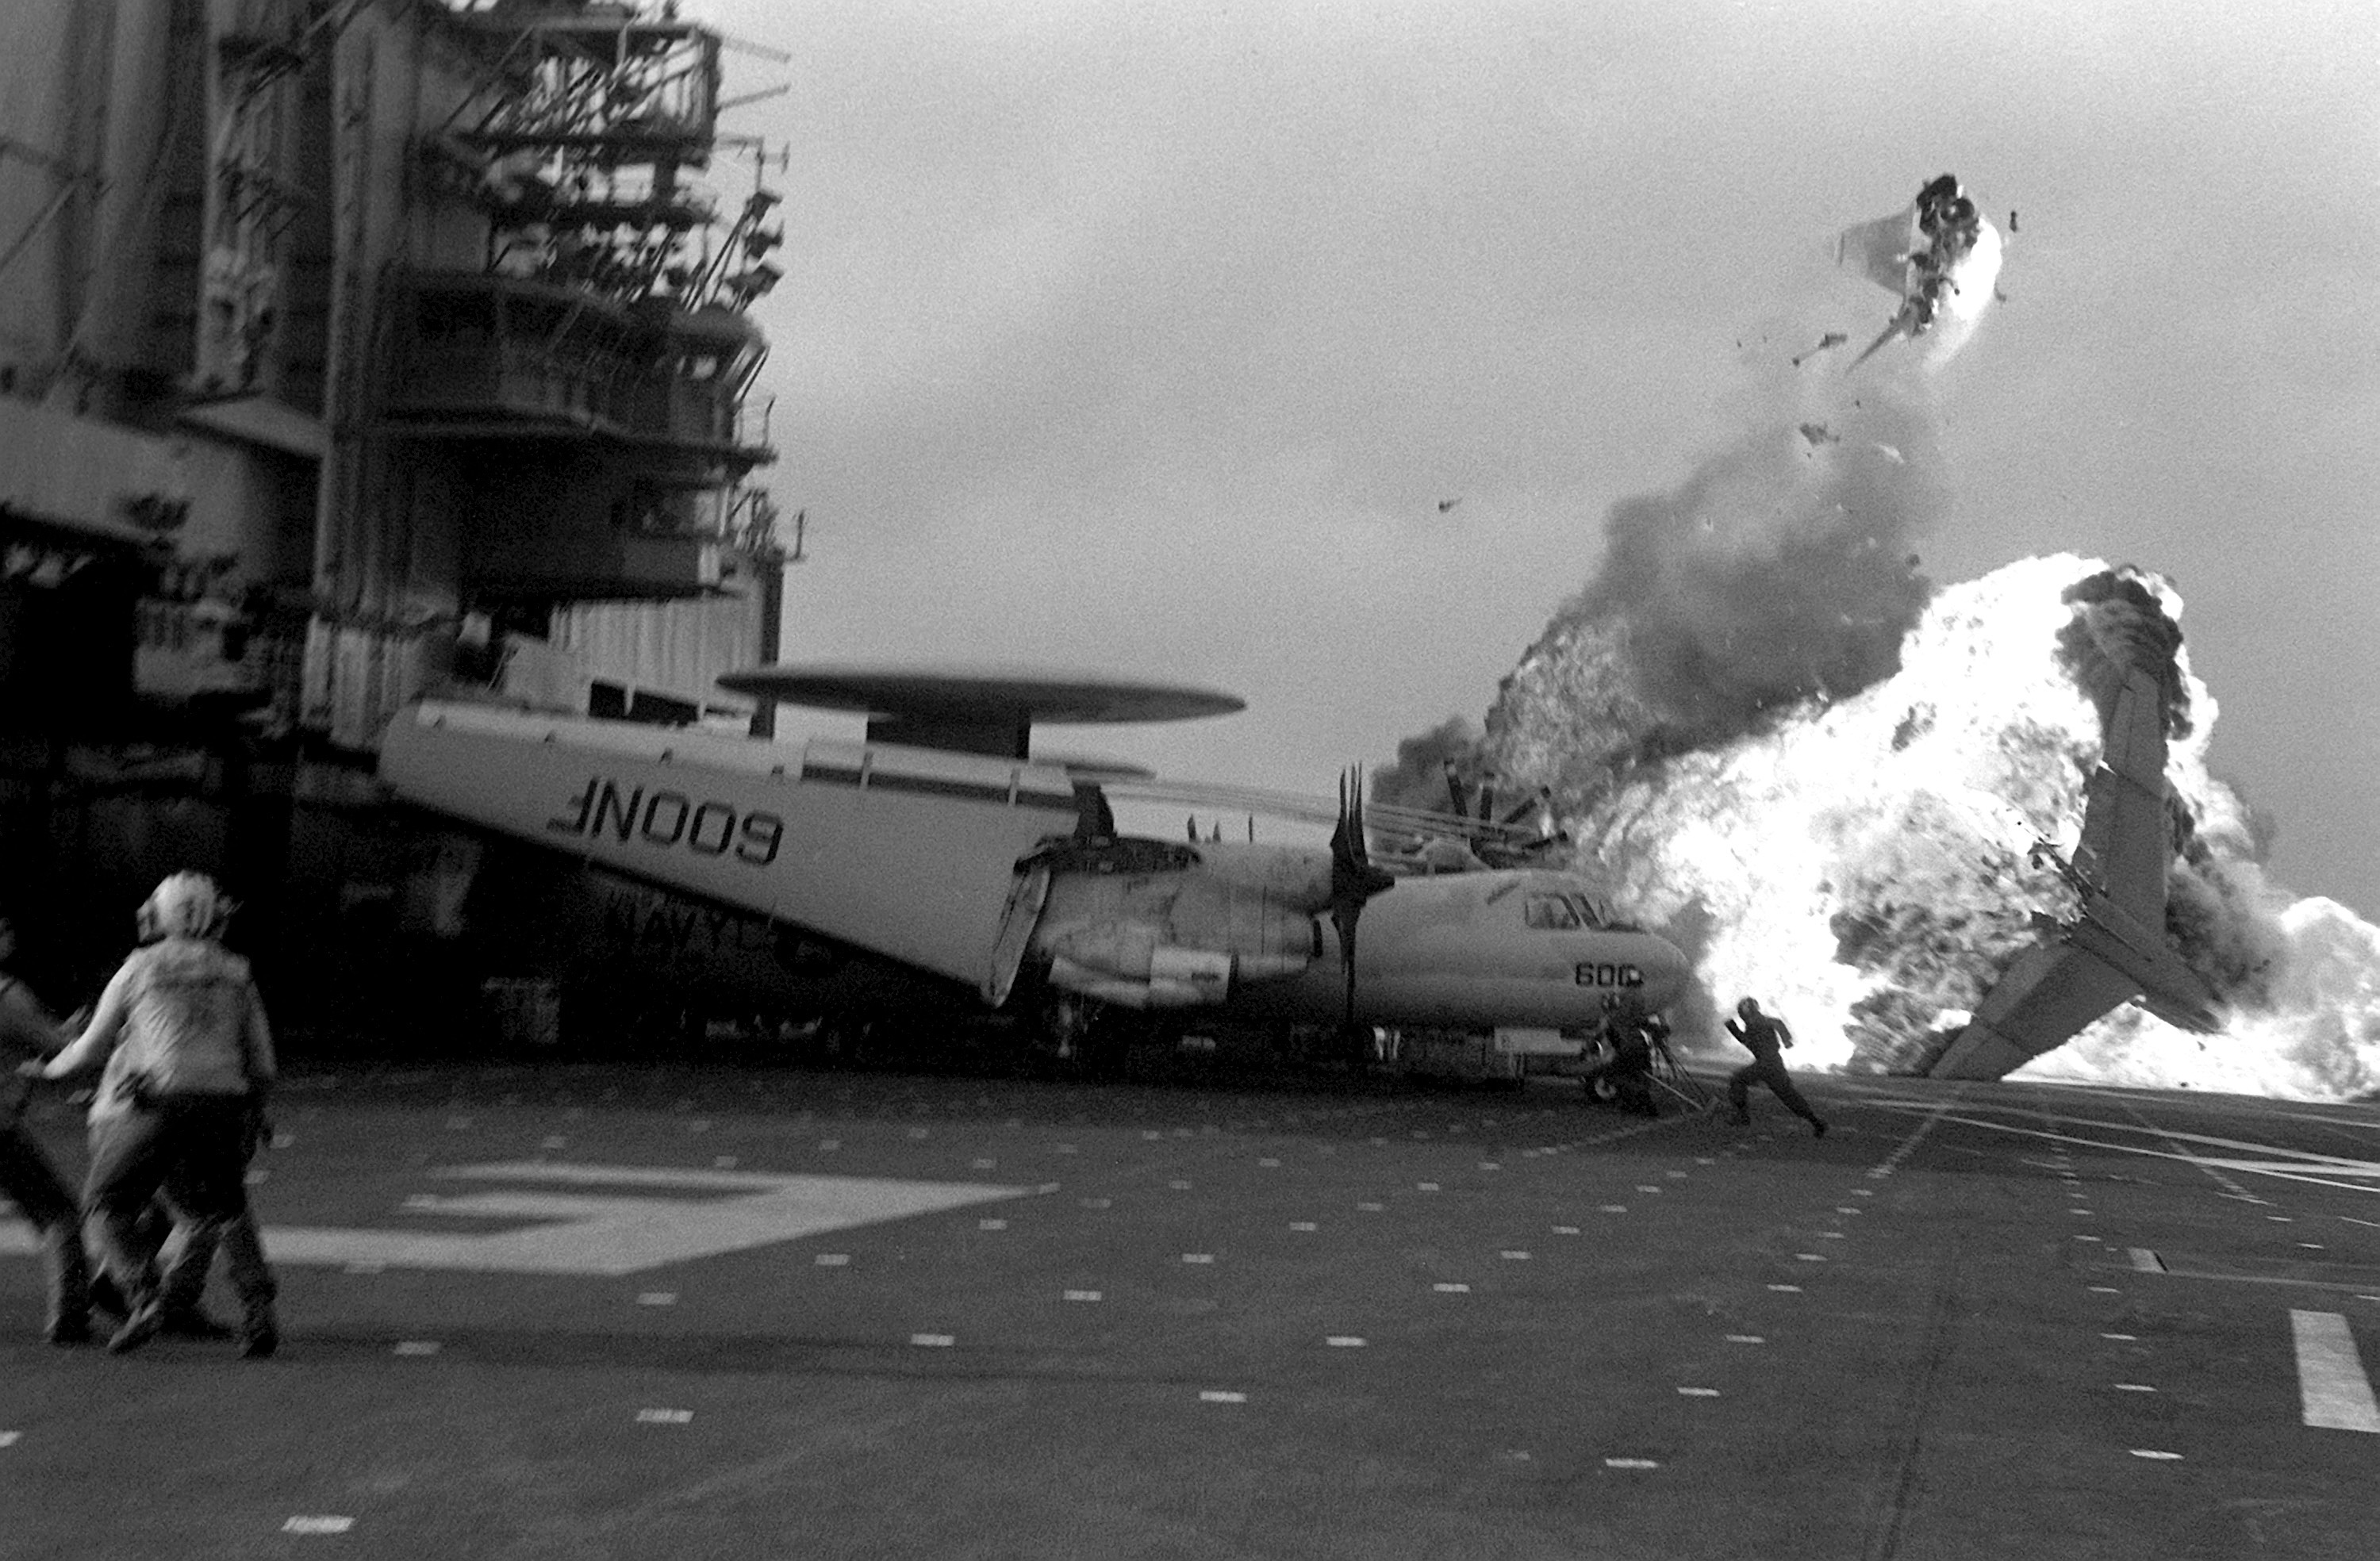 http://upload.wikimedia.org/wikipedia/commons/6/69/A-7E_Corsair_bursts_into_flames_aboard_USS_Midway_(CV-41).jpg